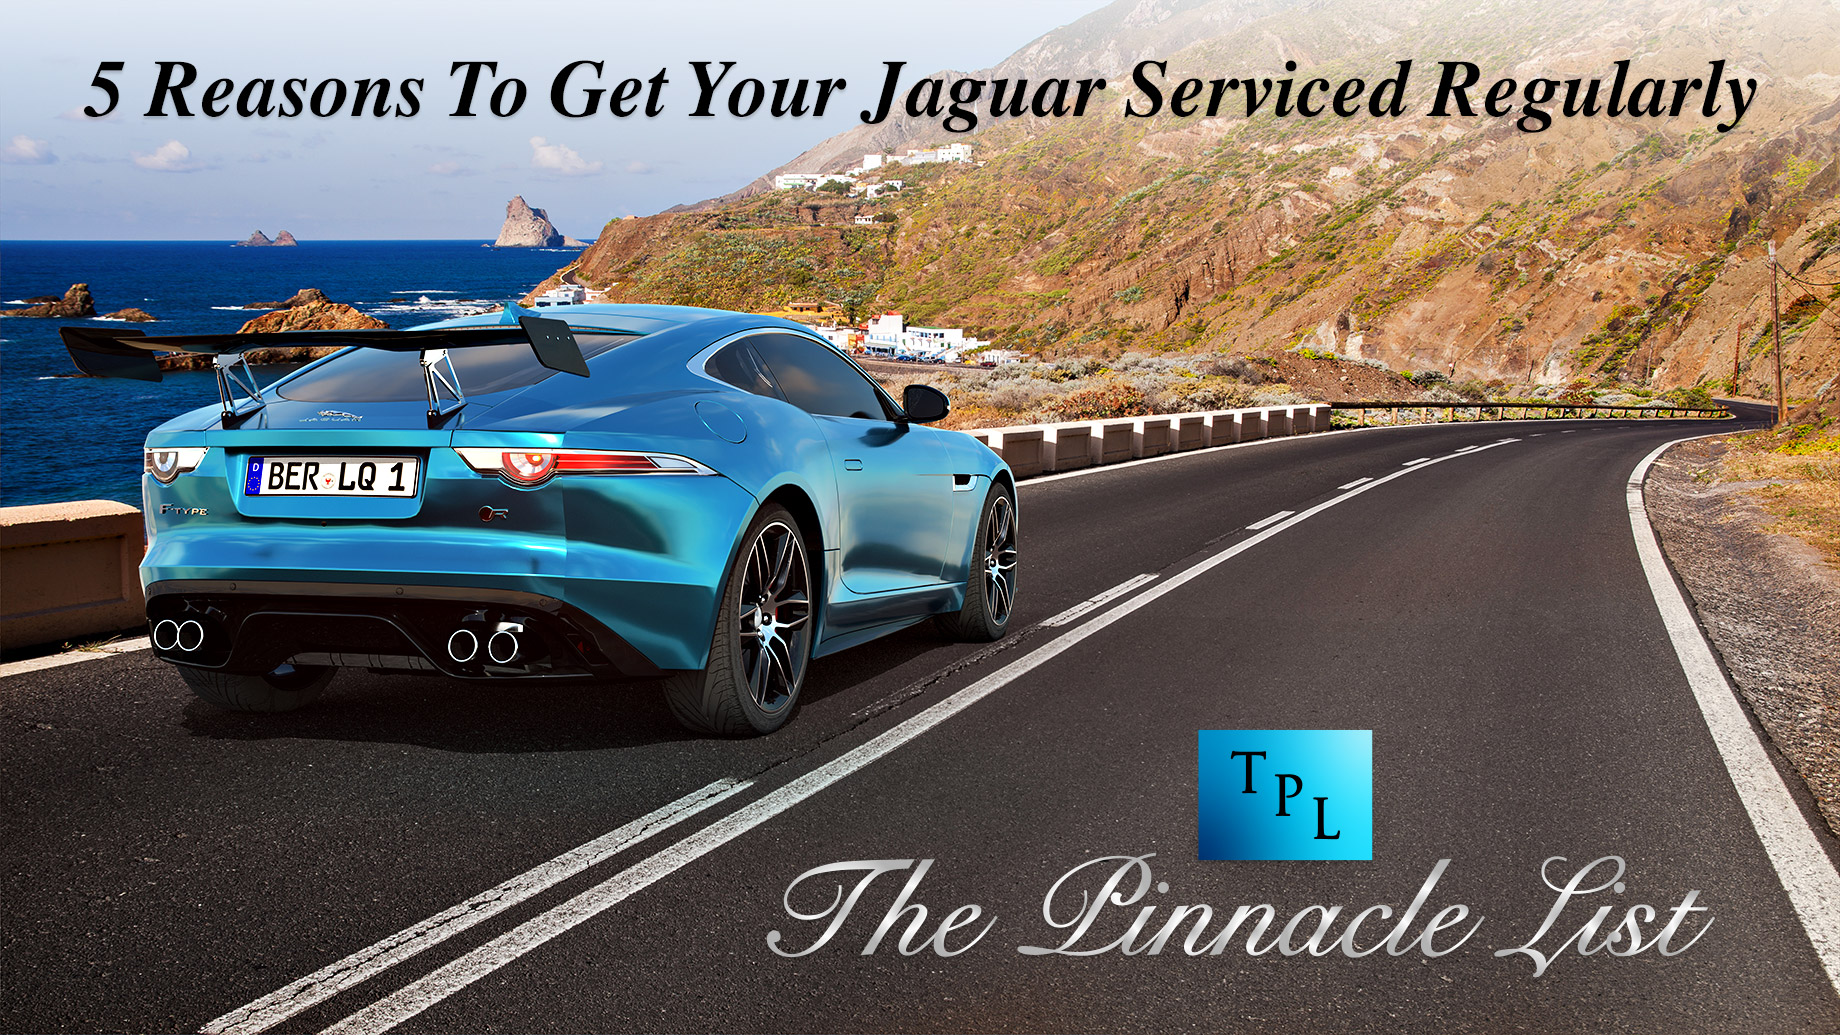 5 Reasons To Get Your Jaguar Serviced Regularly